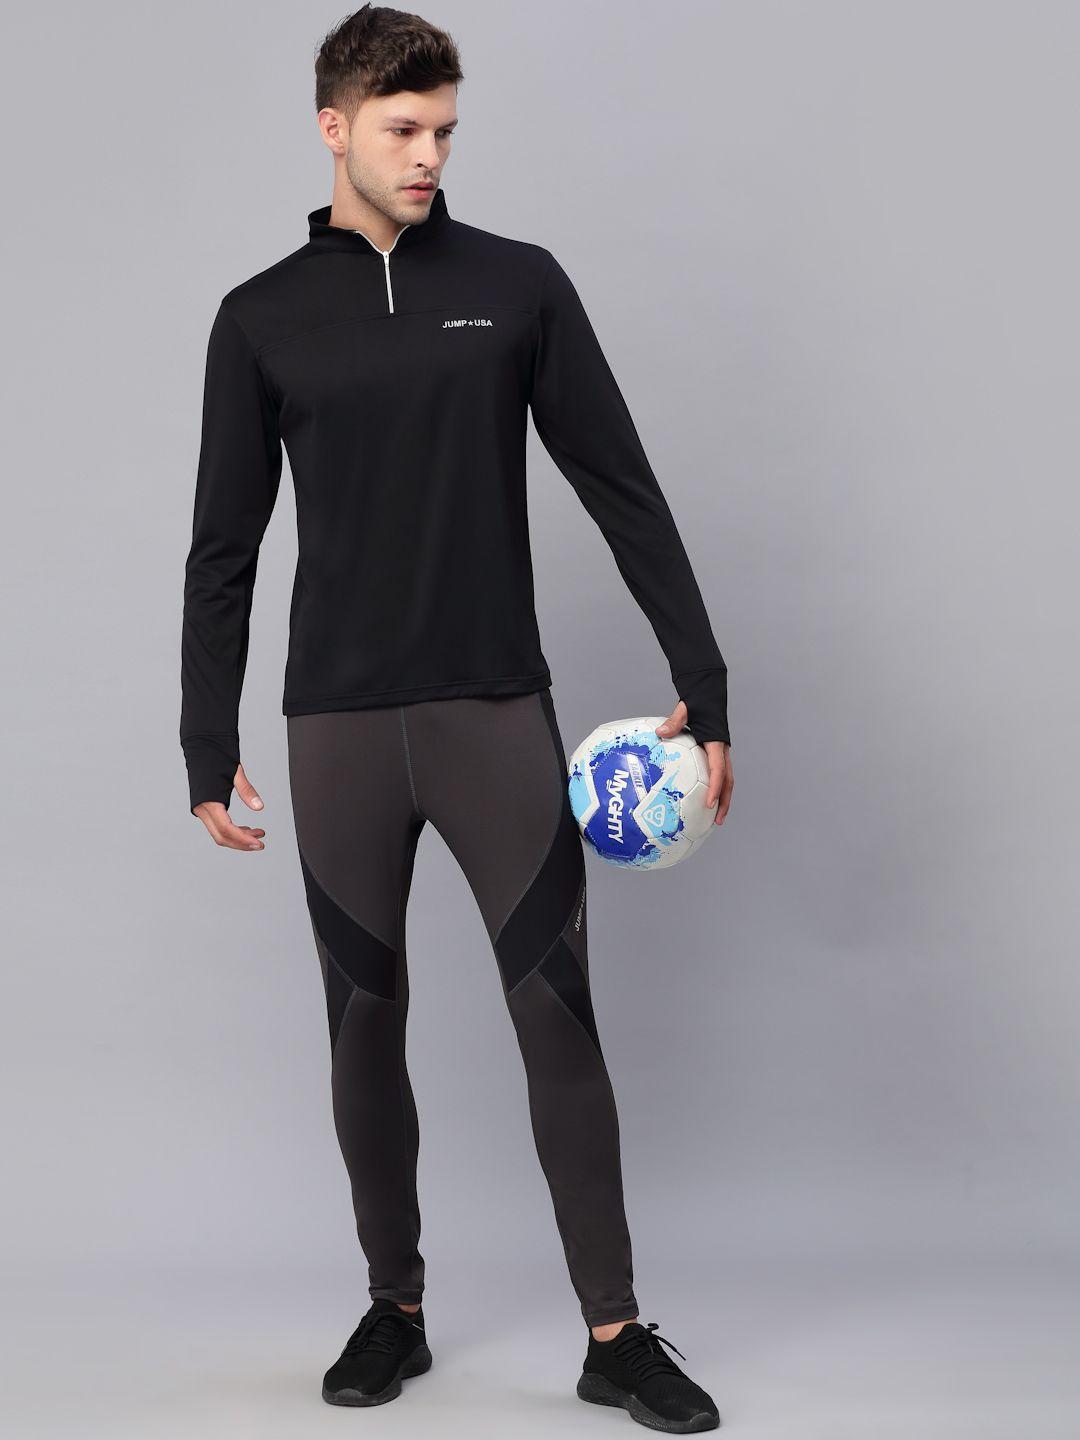 jump usa men charcoal & black dry-fit antimicrobial running tights